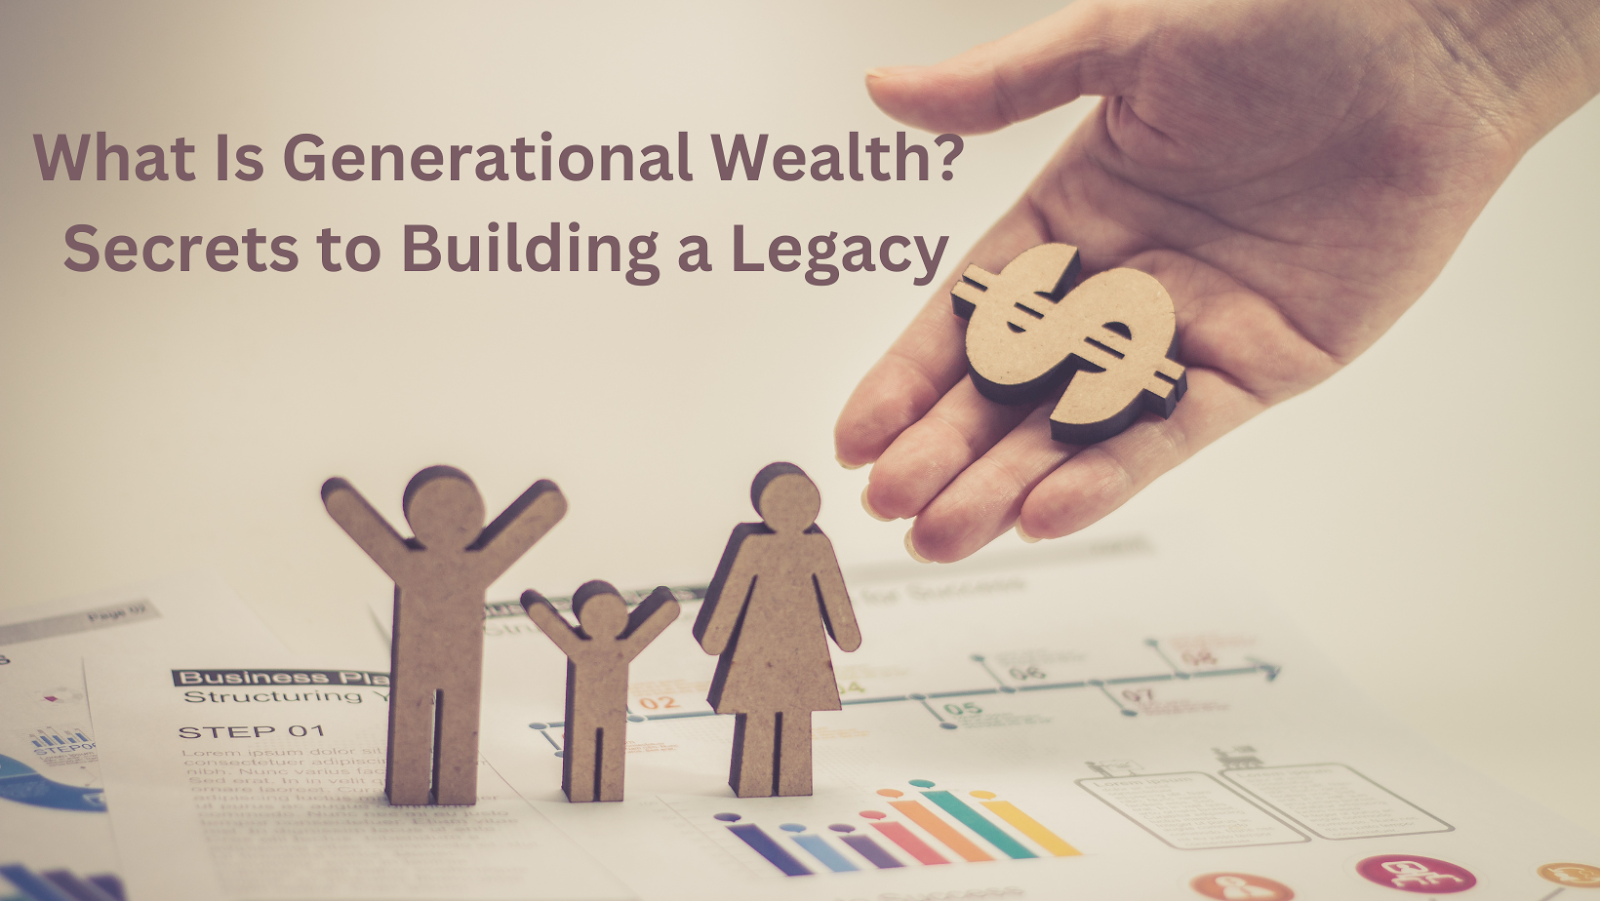 What is Generational Wealth?